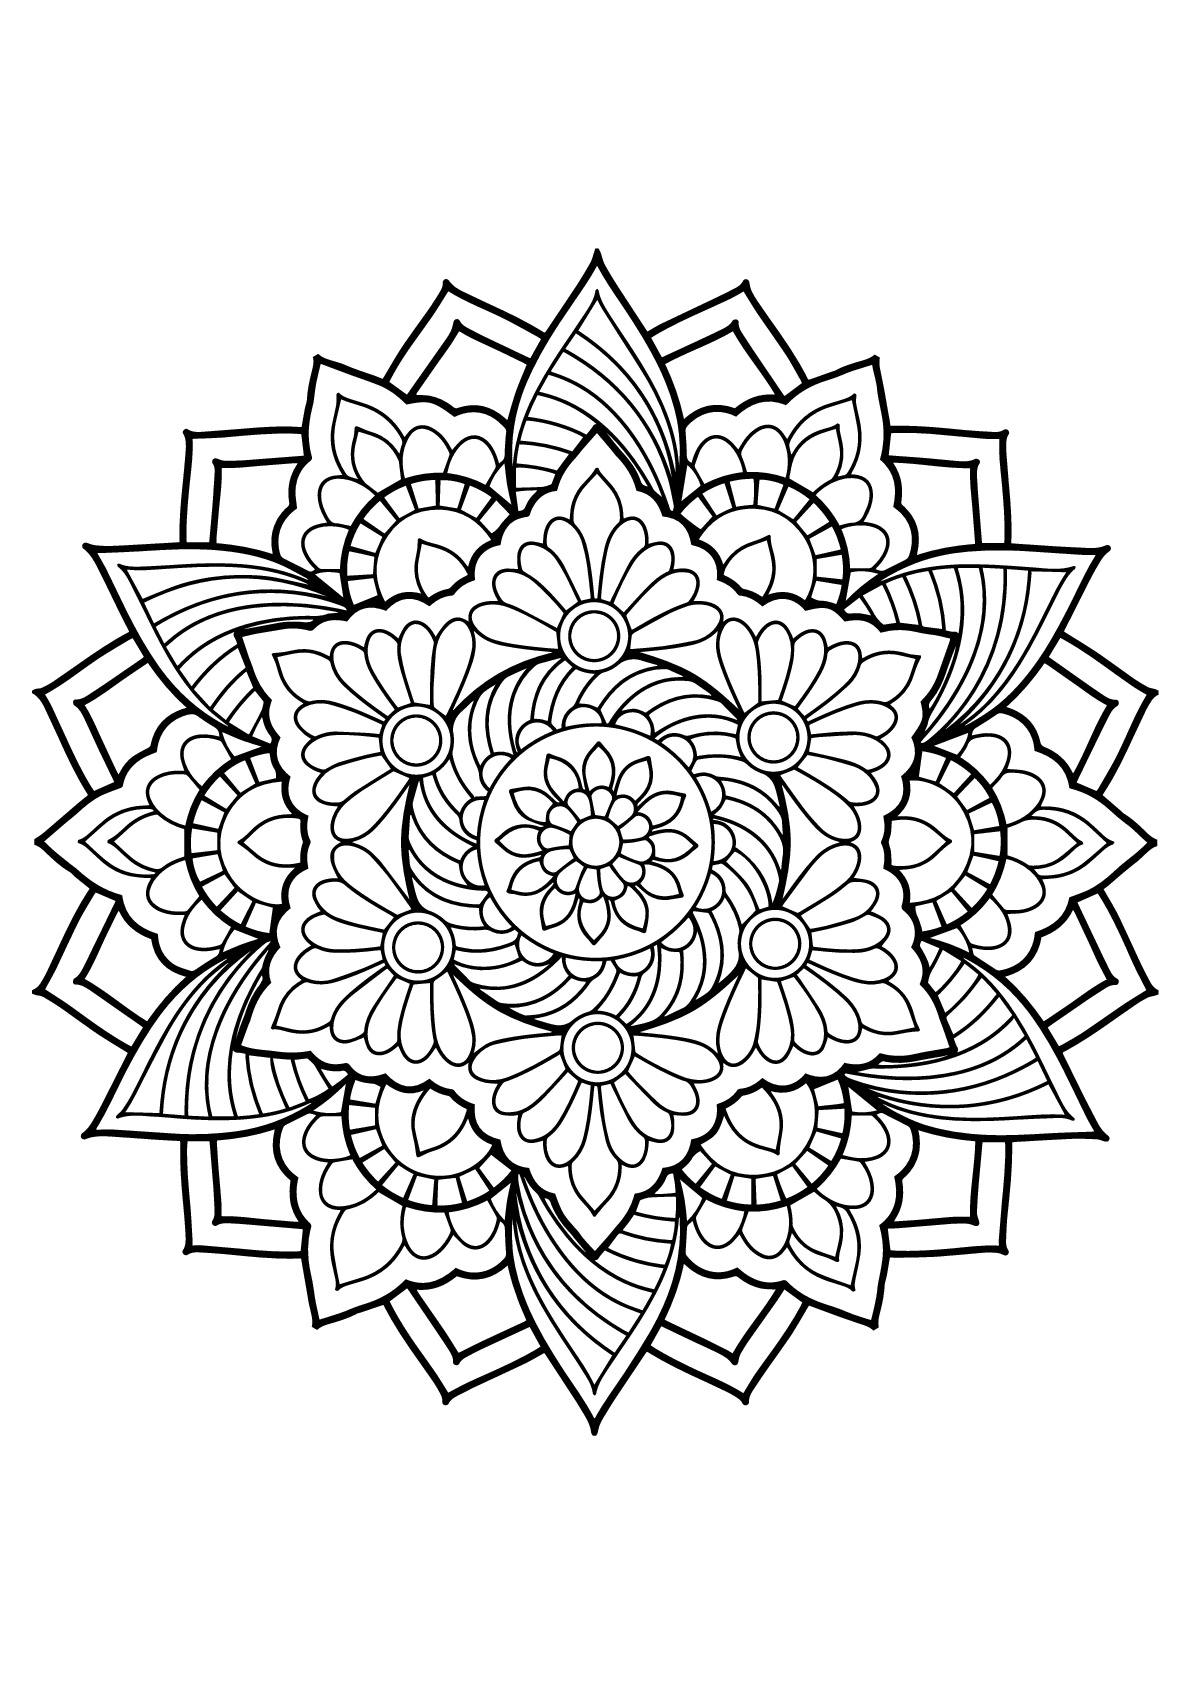 Printable Dbt Coloring Pages Coloring Pages